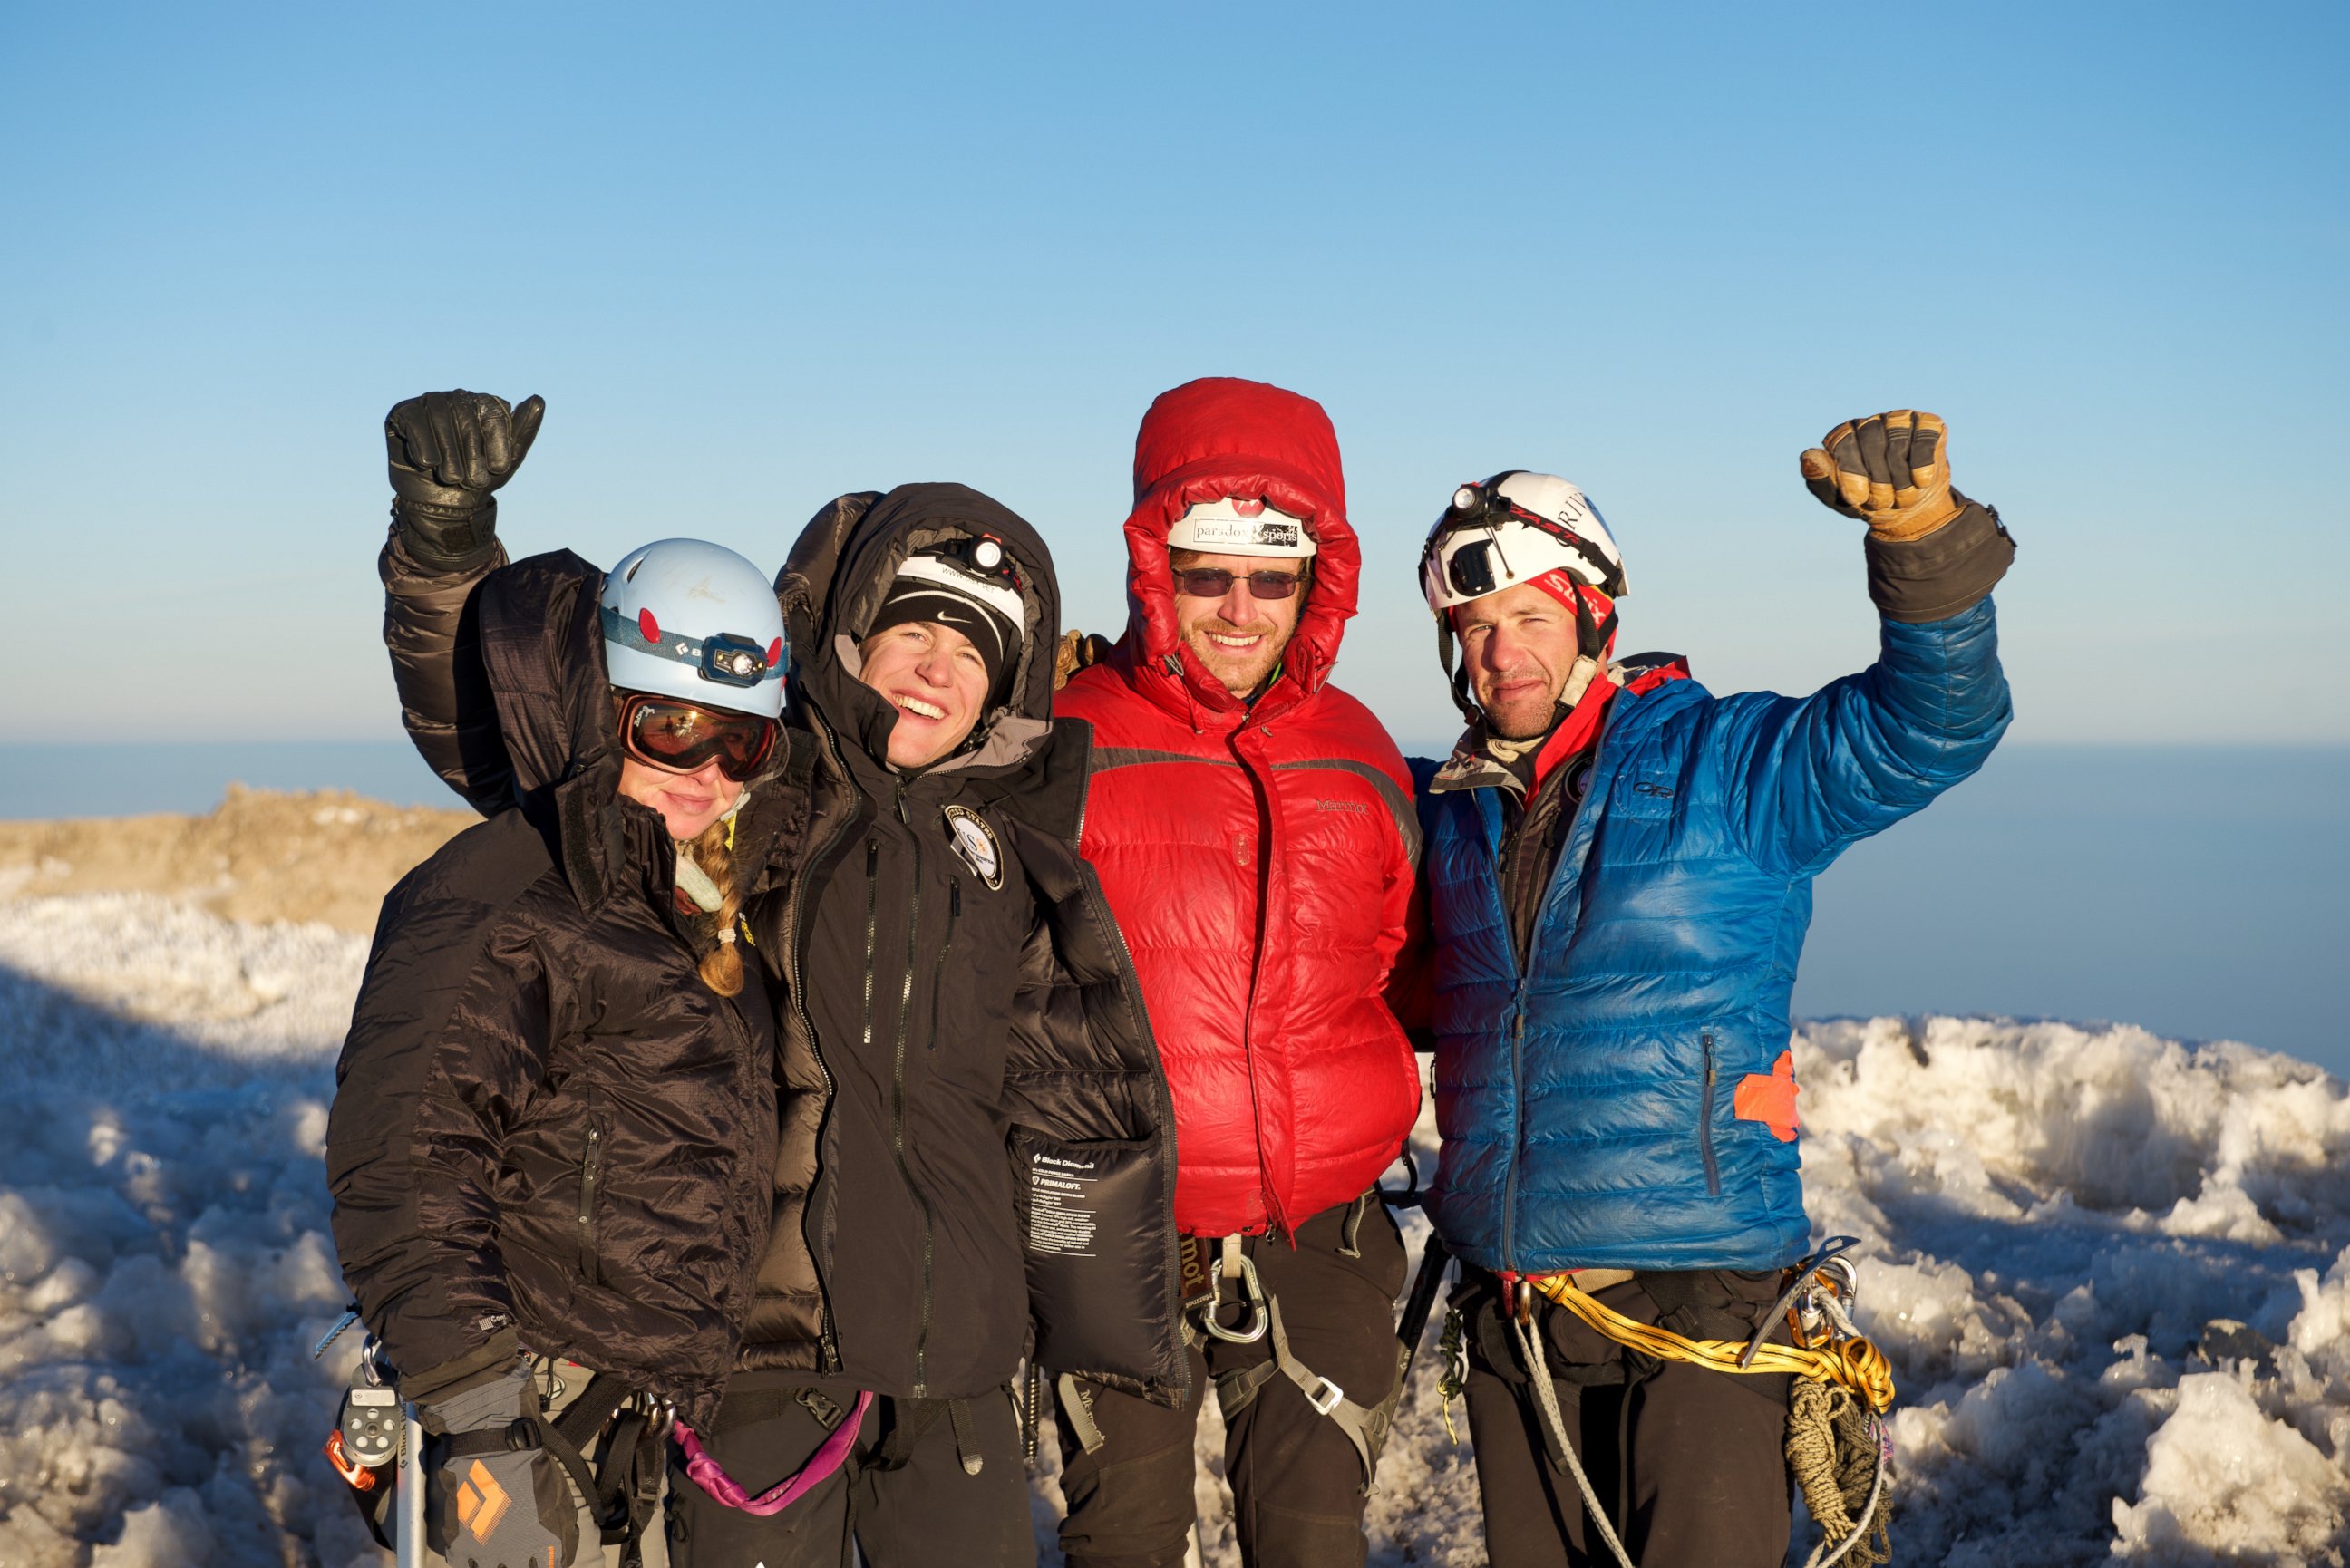 PHOTO: Captain Matt Hickey, USX CEO (at far right), led the climbing team in their training expedition at Mount Rainier the group will begin the Mount Everest ascent, April 7, 2016.